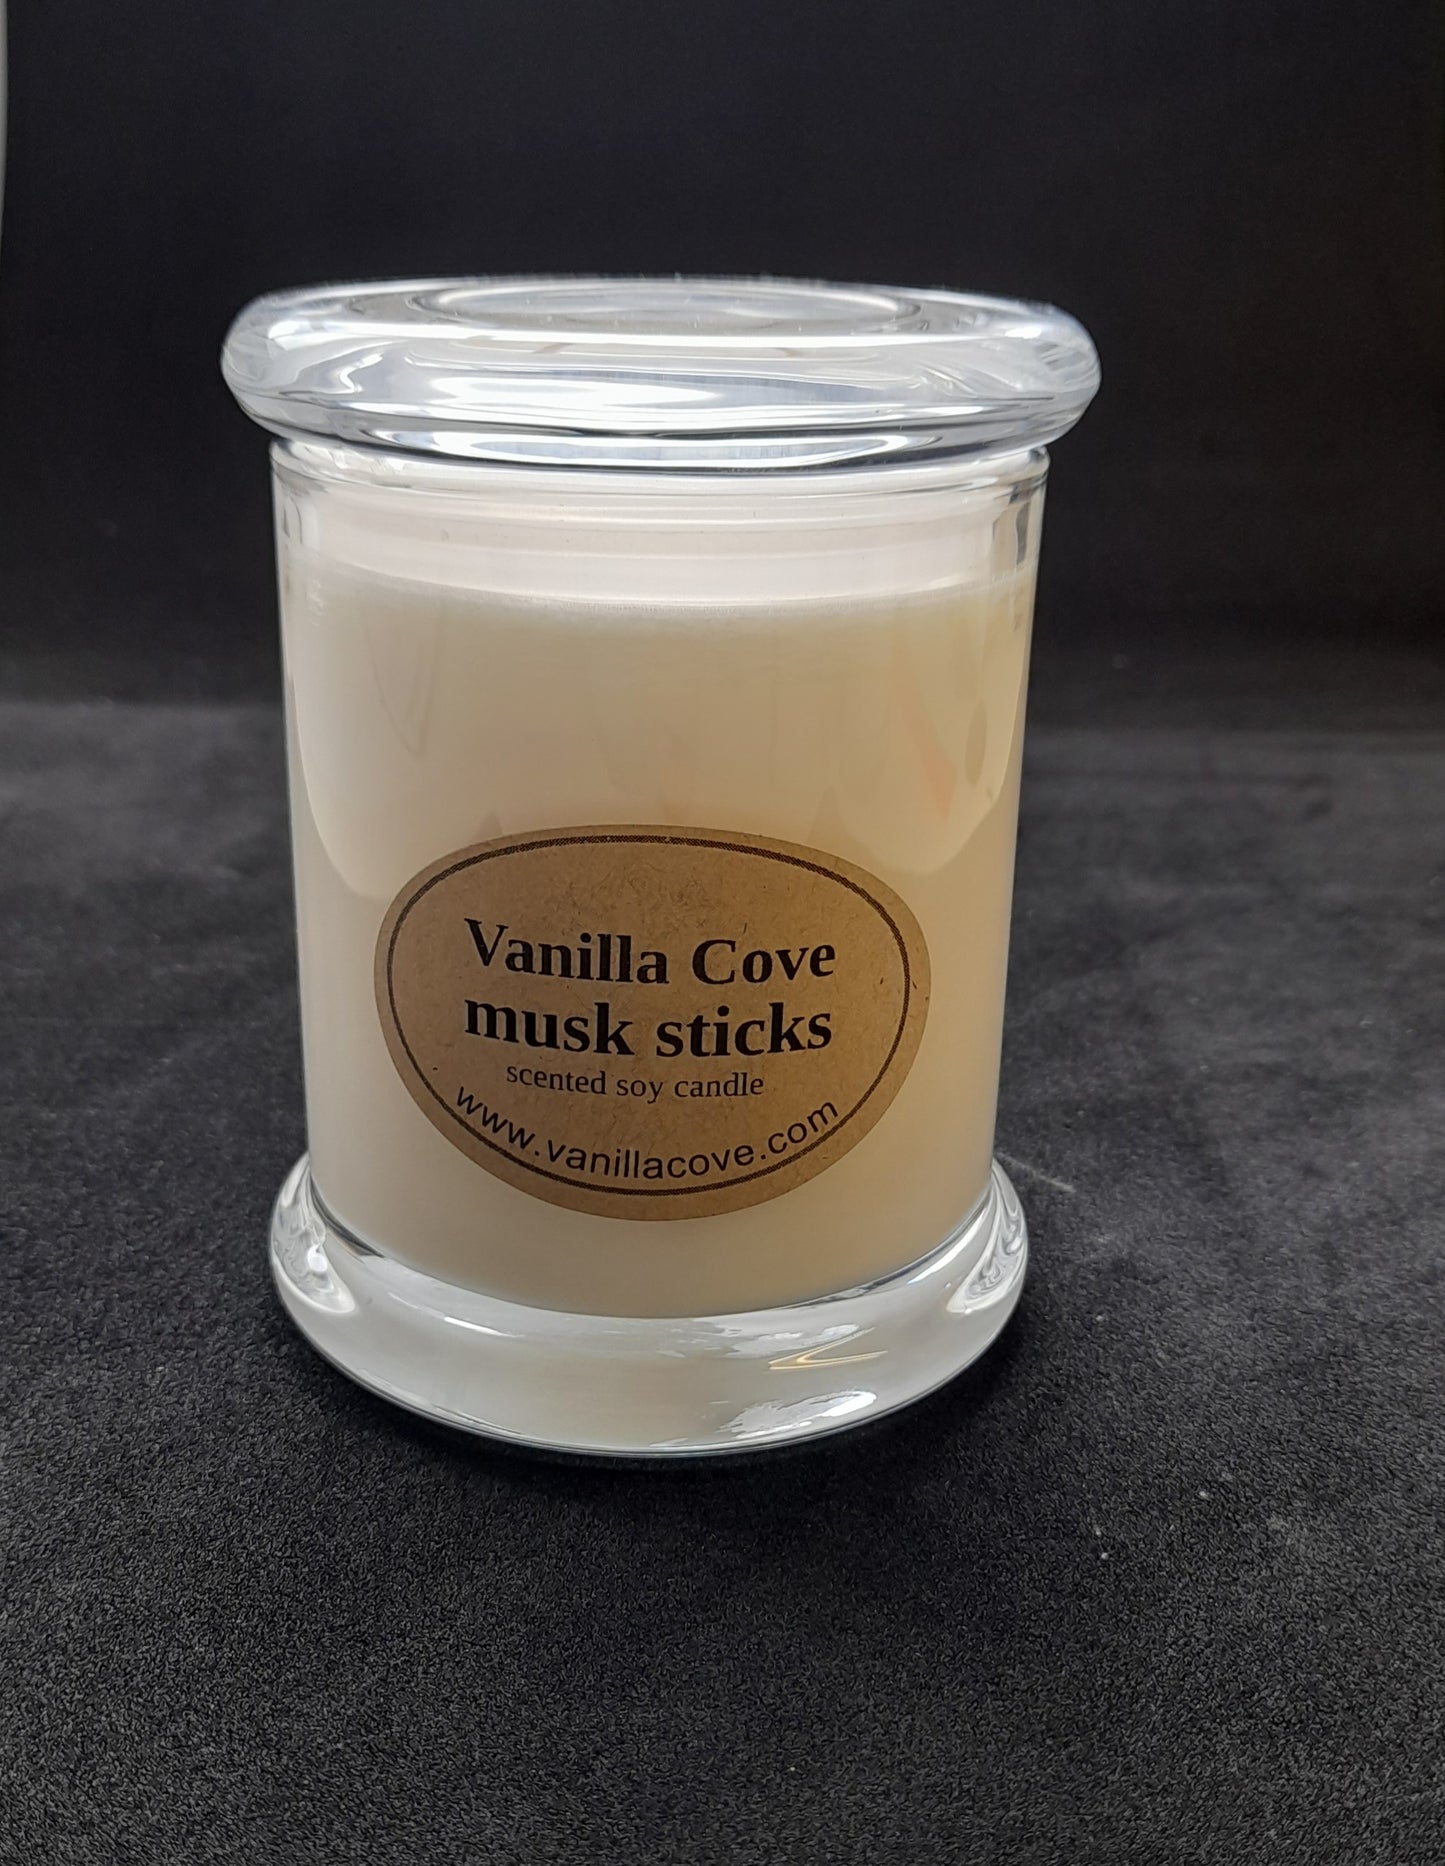 Vanilla Cove Soy Candle 50 hour Musk Sticks Fragrance in clear glass jar and glass lid